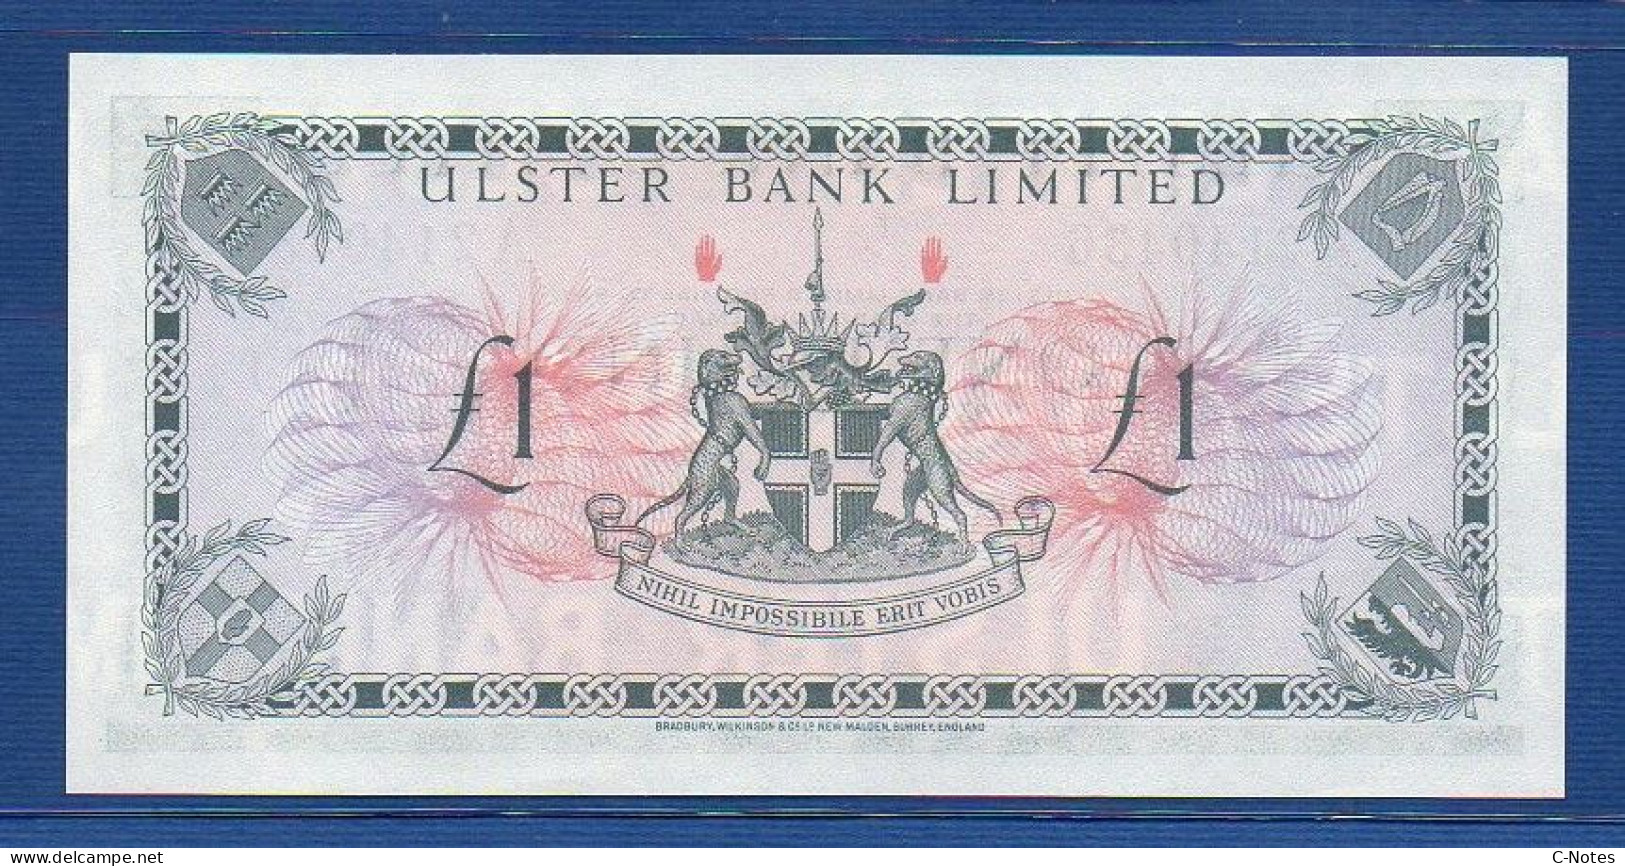 NORTHERN IRELAND - P.325b – 1 POUND 01.03.1973 UNC, S/n A2140436 Ulster Bank Limited - 1 Pound